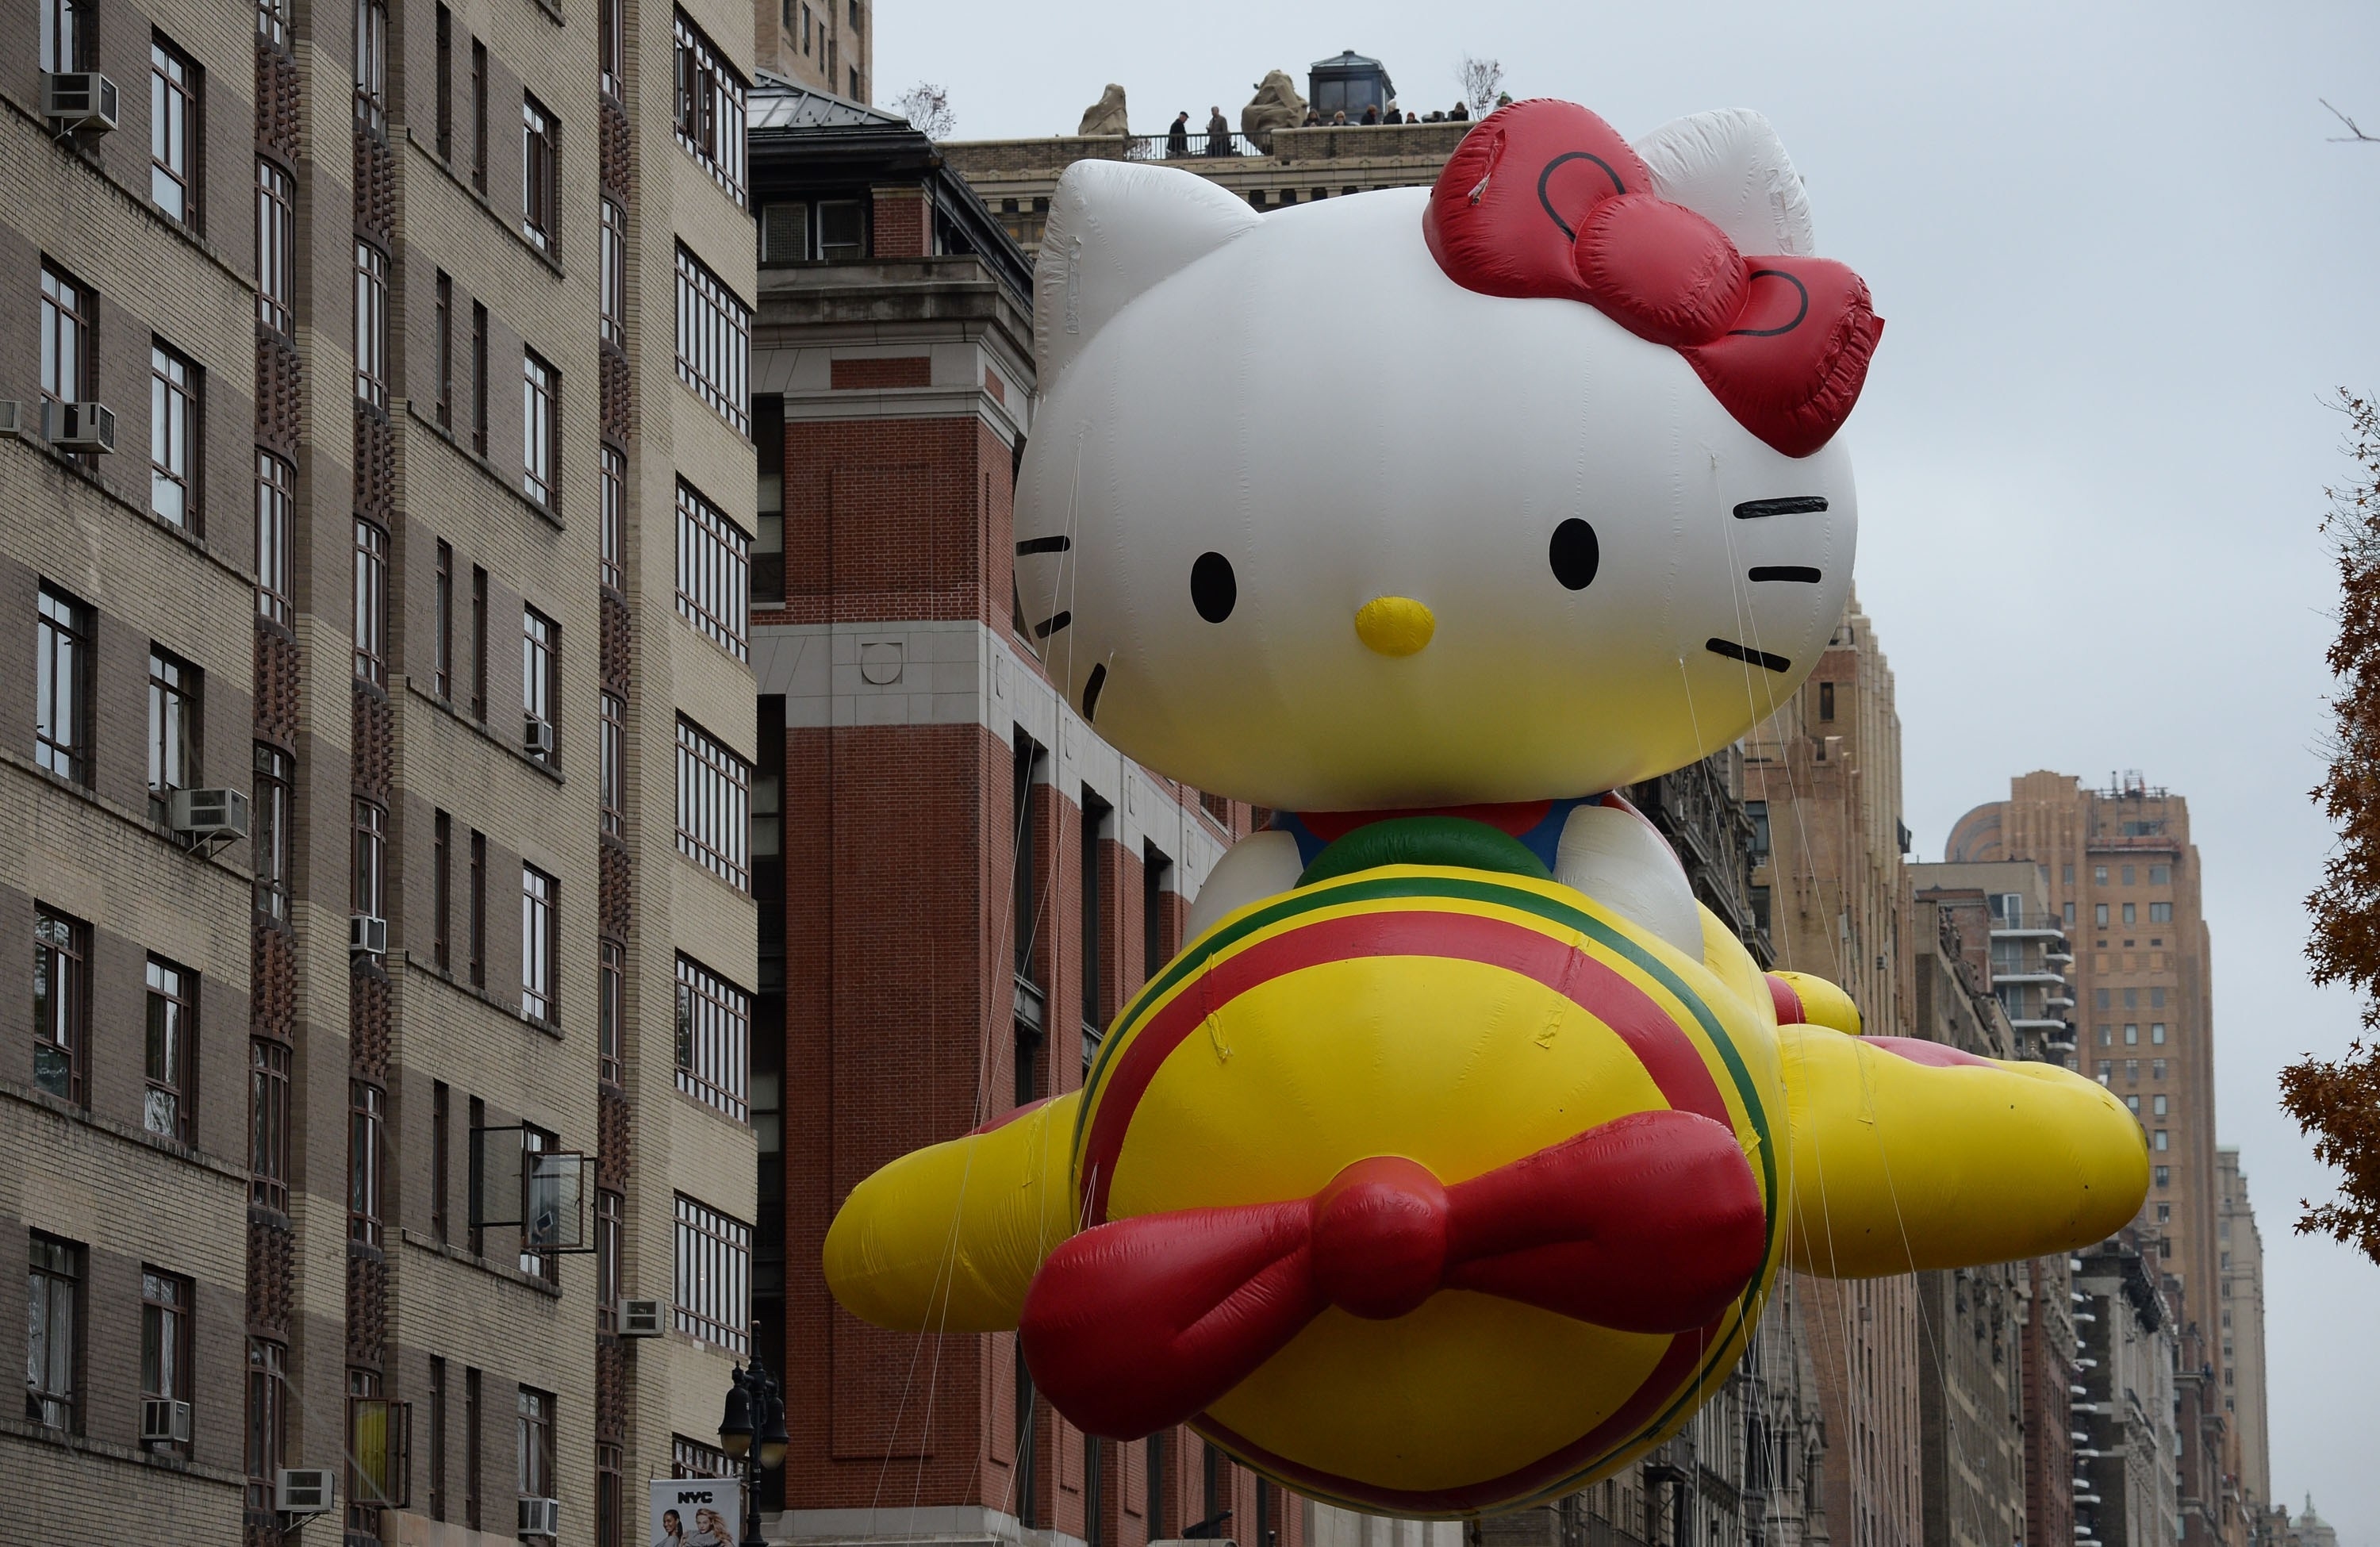 Hello Kitty balloon floats in a parade with city buildings in the background